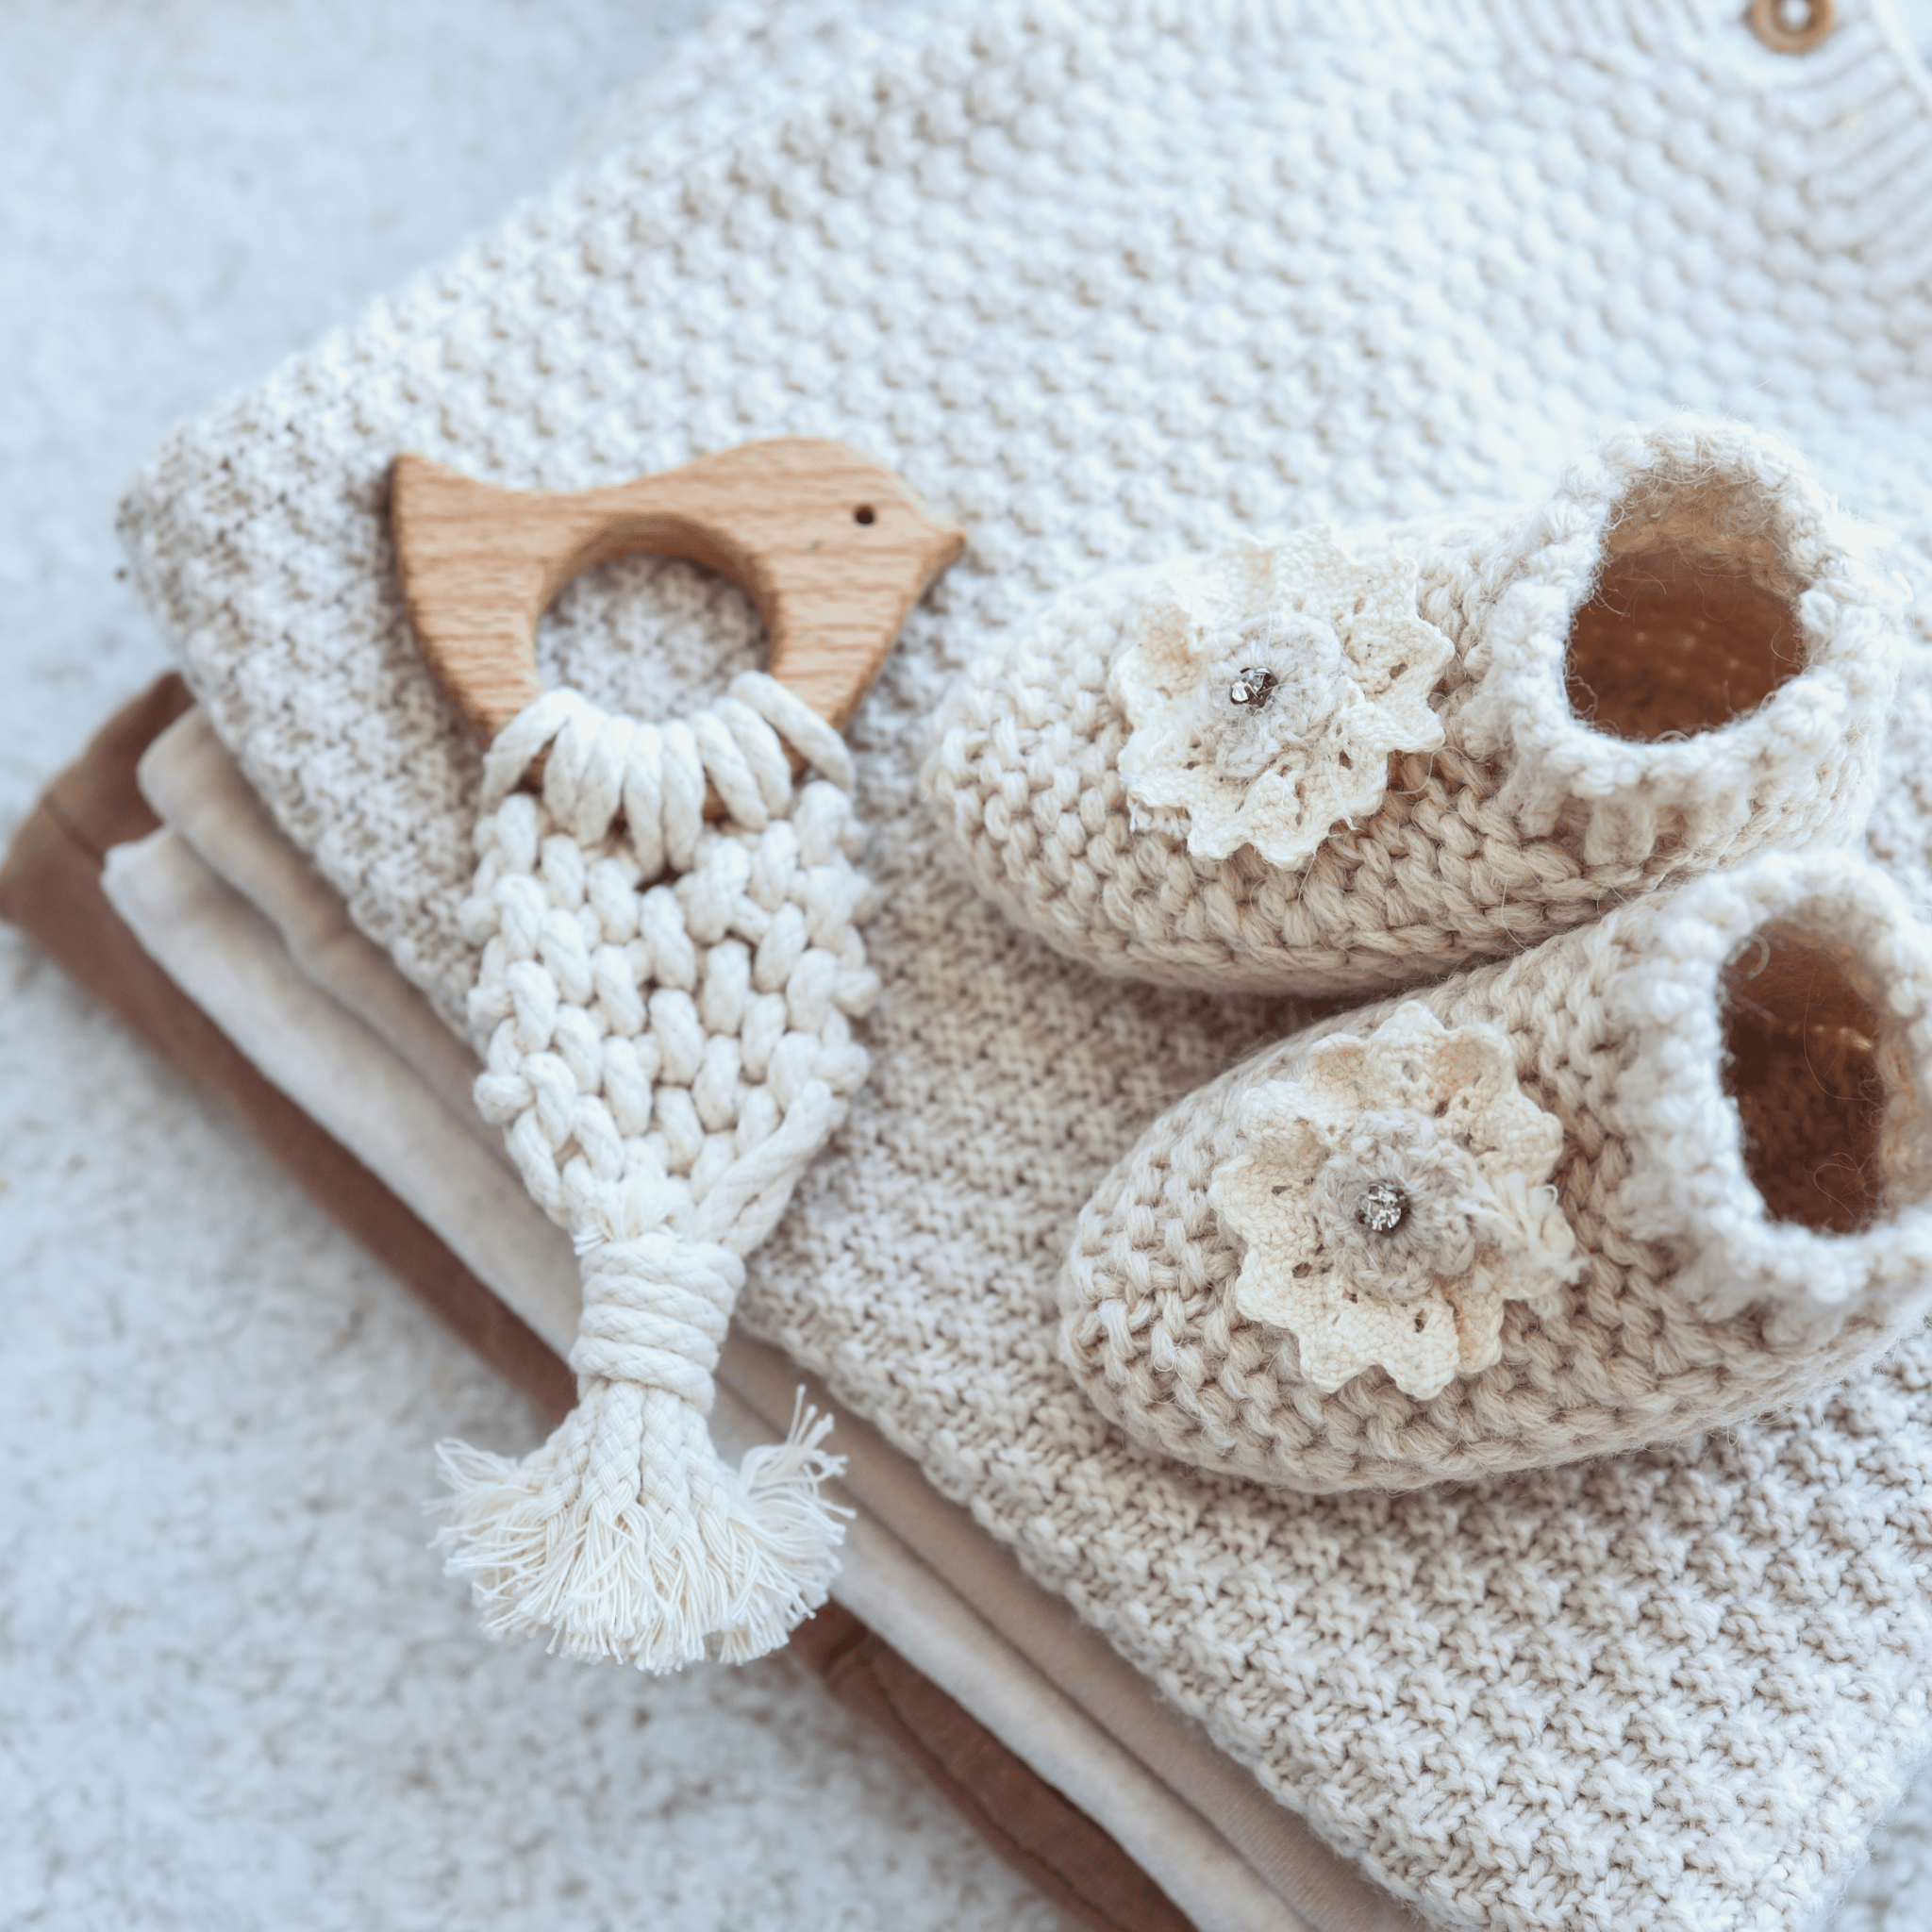 A pair of handmade knitted baby booties with floral details, accompanied by a wooden bird-shaped teether on a folded beige blanket from the [6-Month-Prepaid] Hooks & Needles Subscription Box #10.